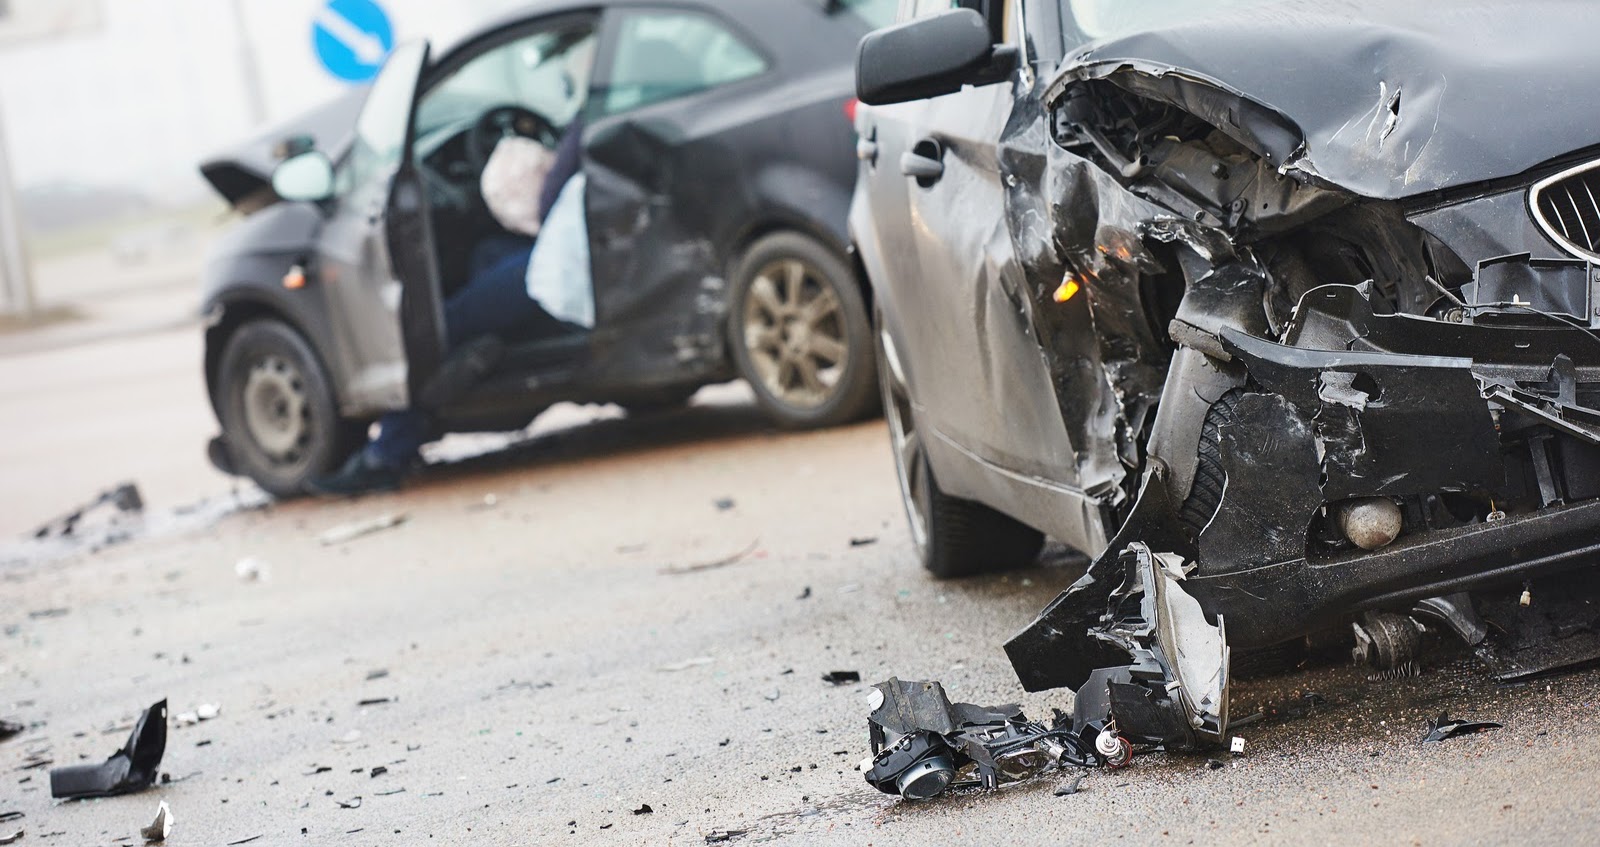 Should You Call Your Insurance or Attorney First After a Car Accident?